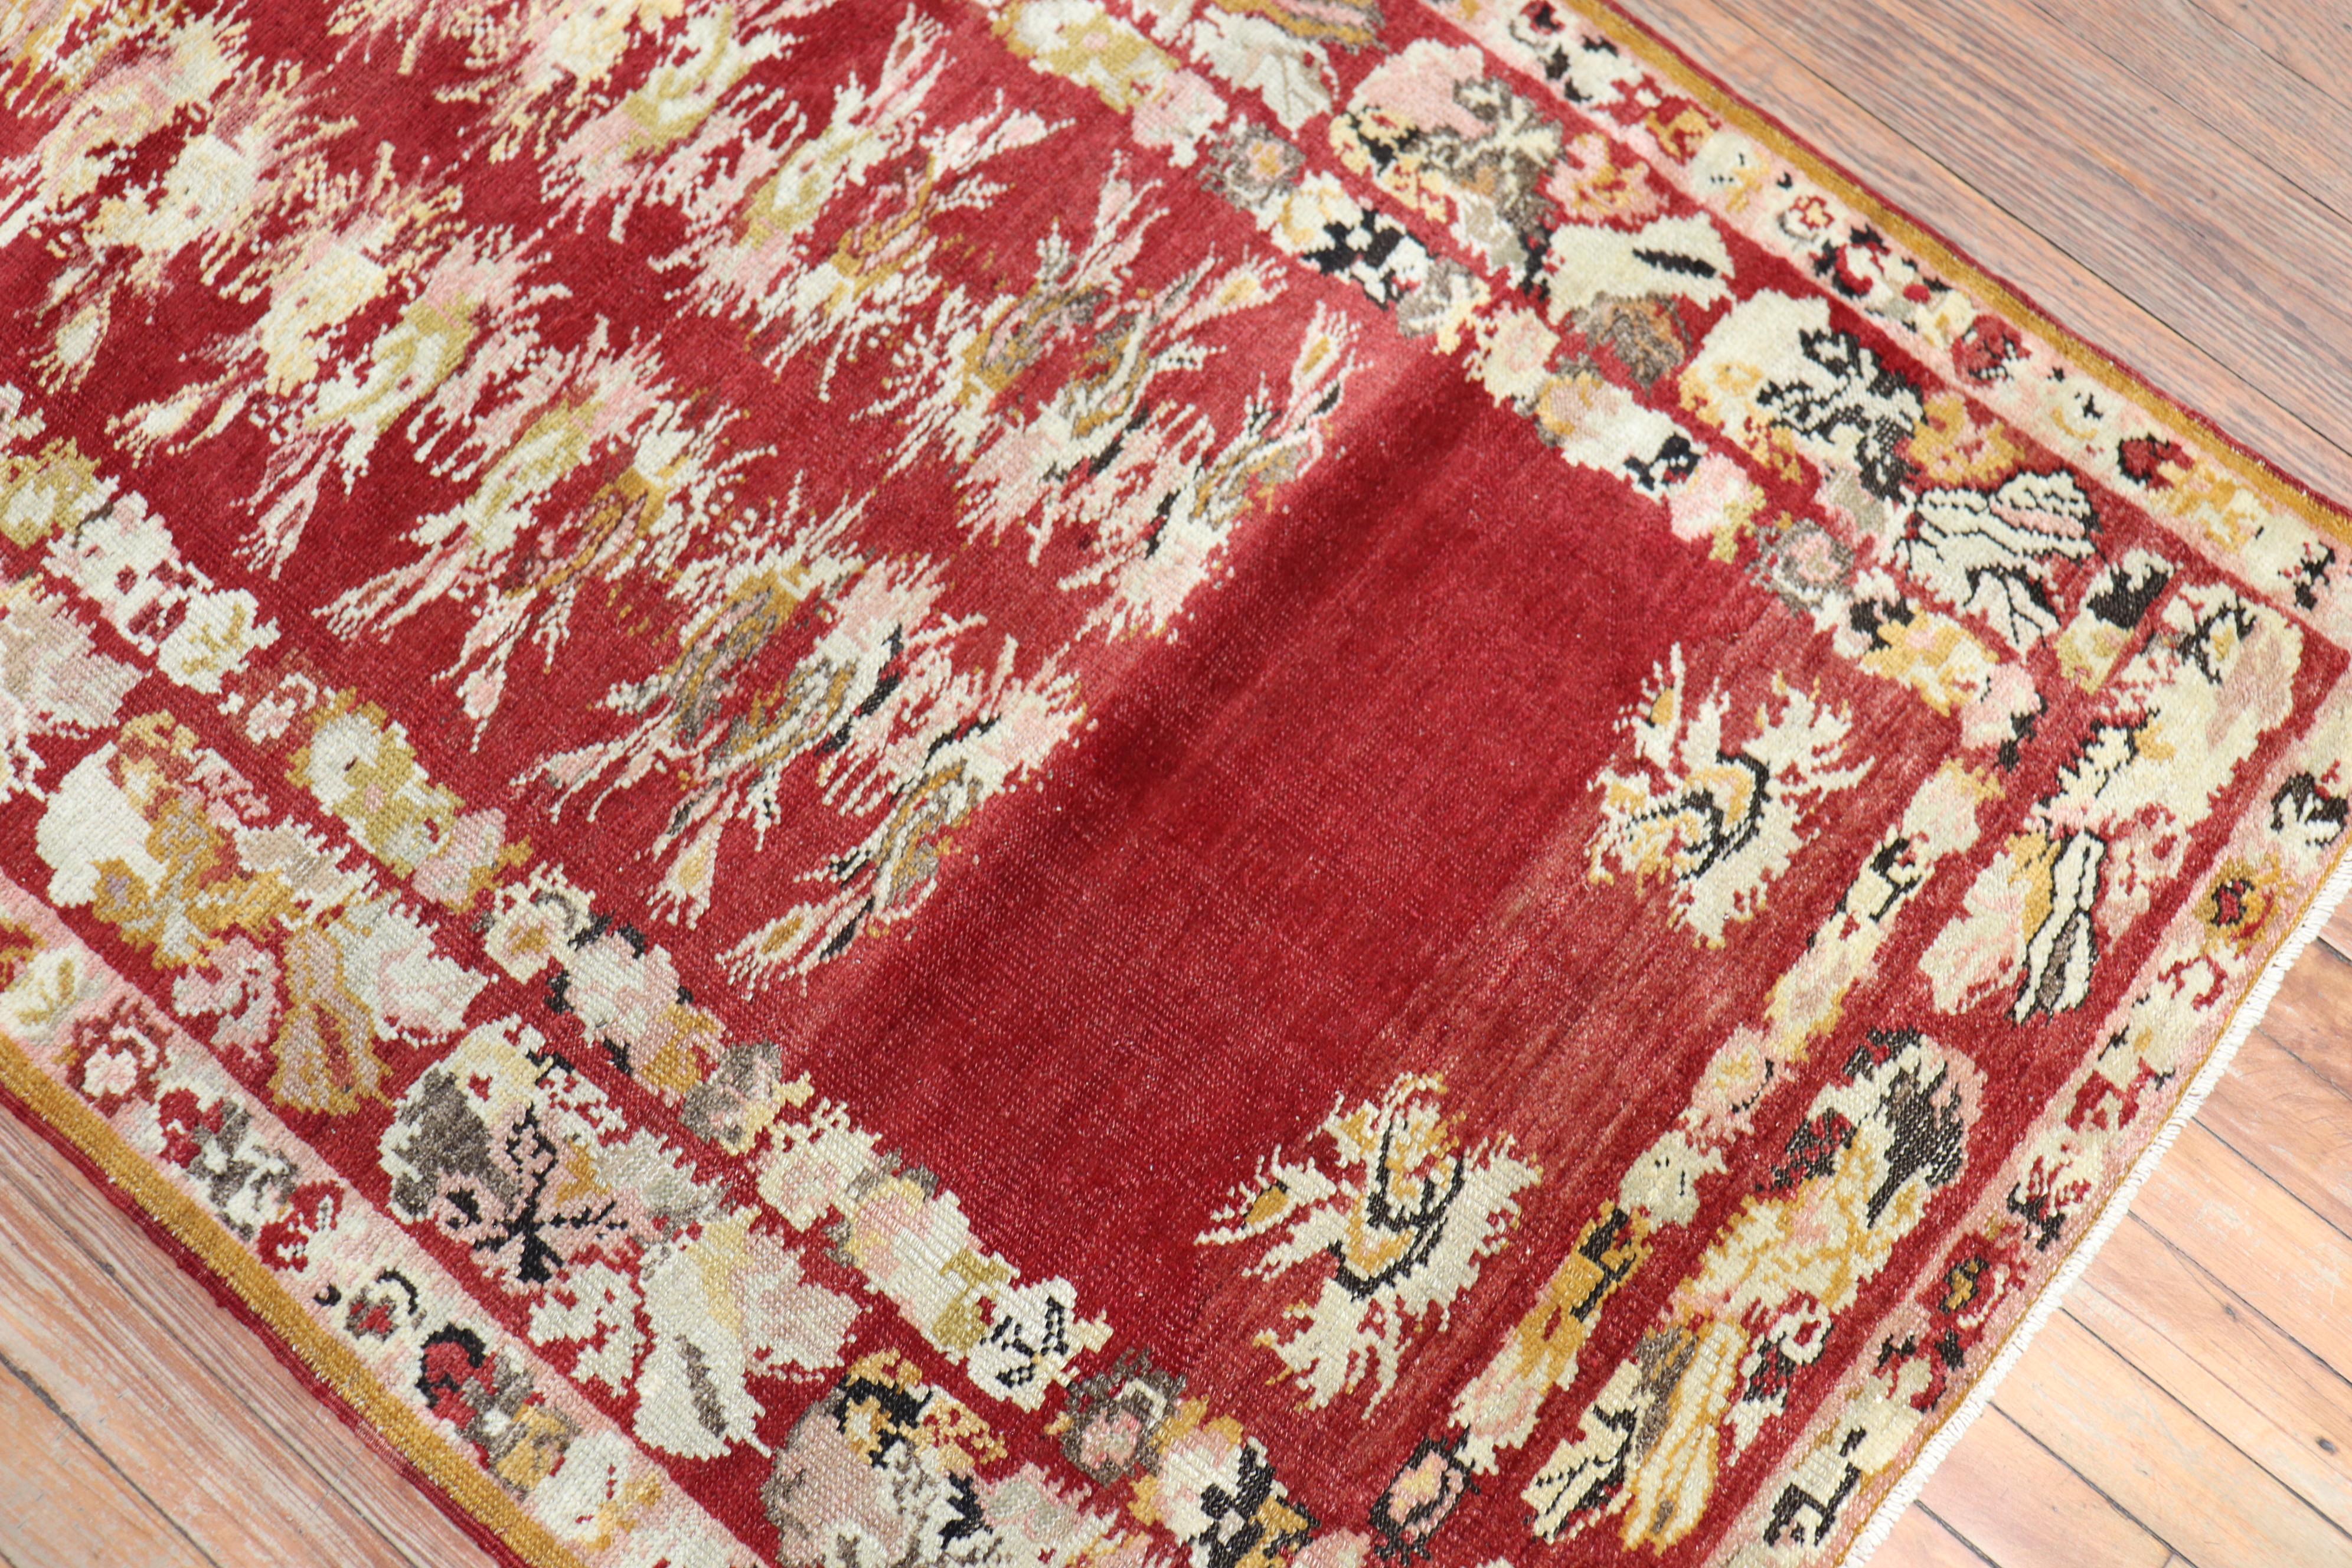 Hand-Woven Cherry Red Antique Turkish Melas Rug, Early 20th Century For Sale